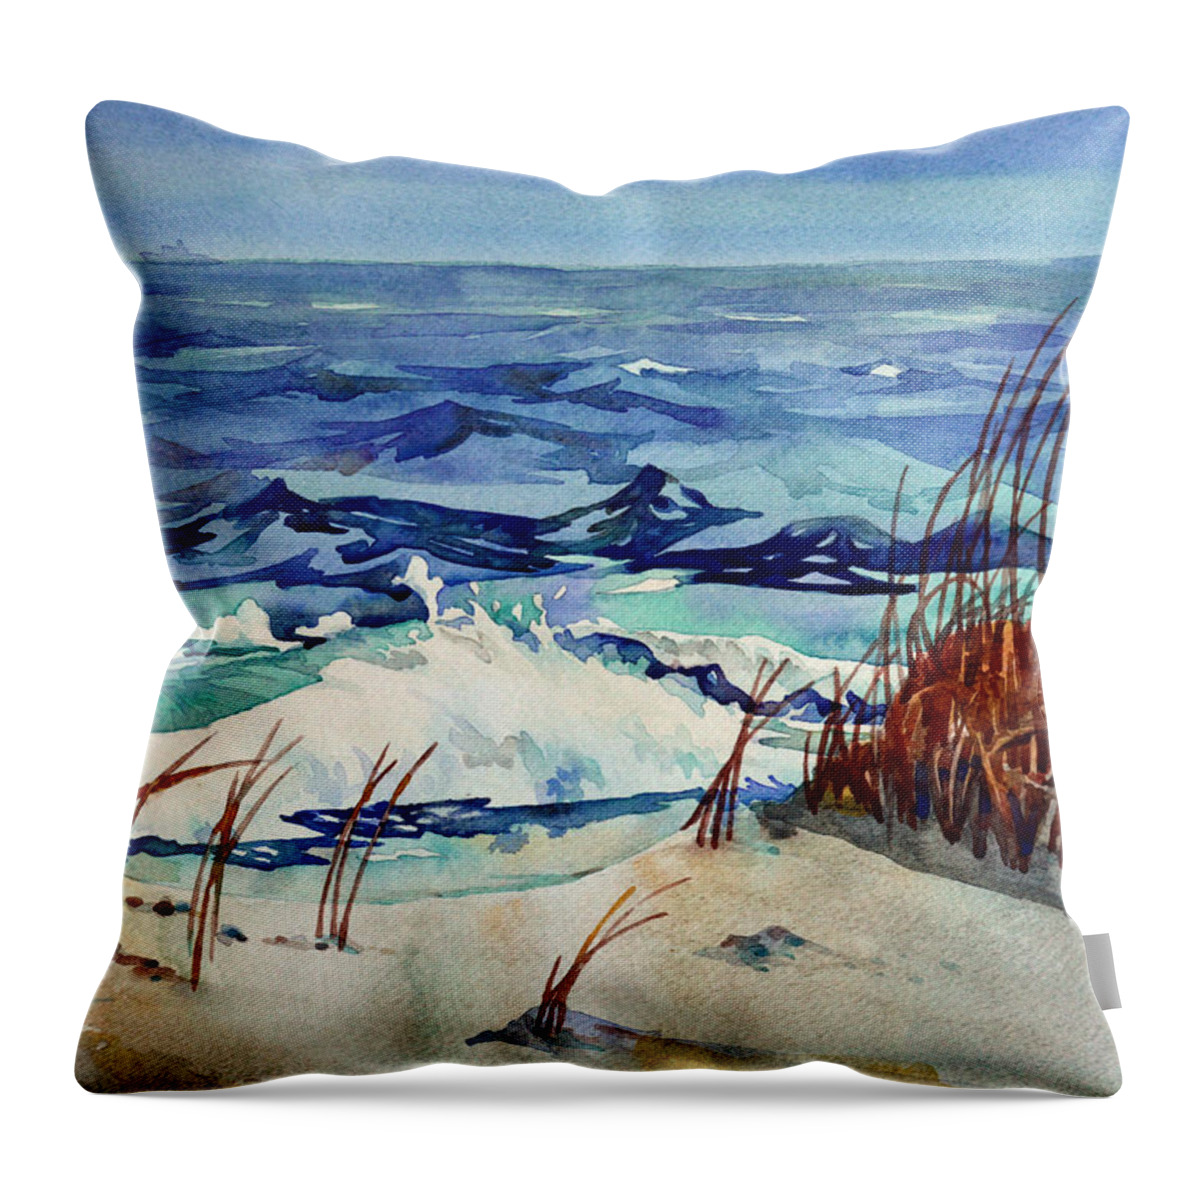 Water Throw Pillow featuring the painting Winter Waves by Mick Williams